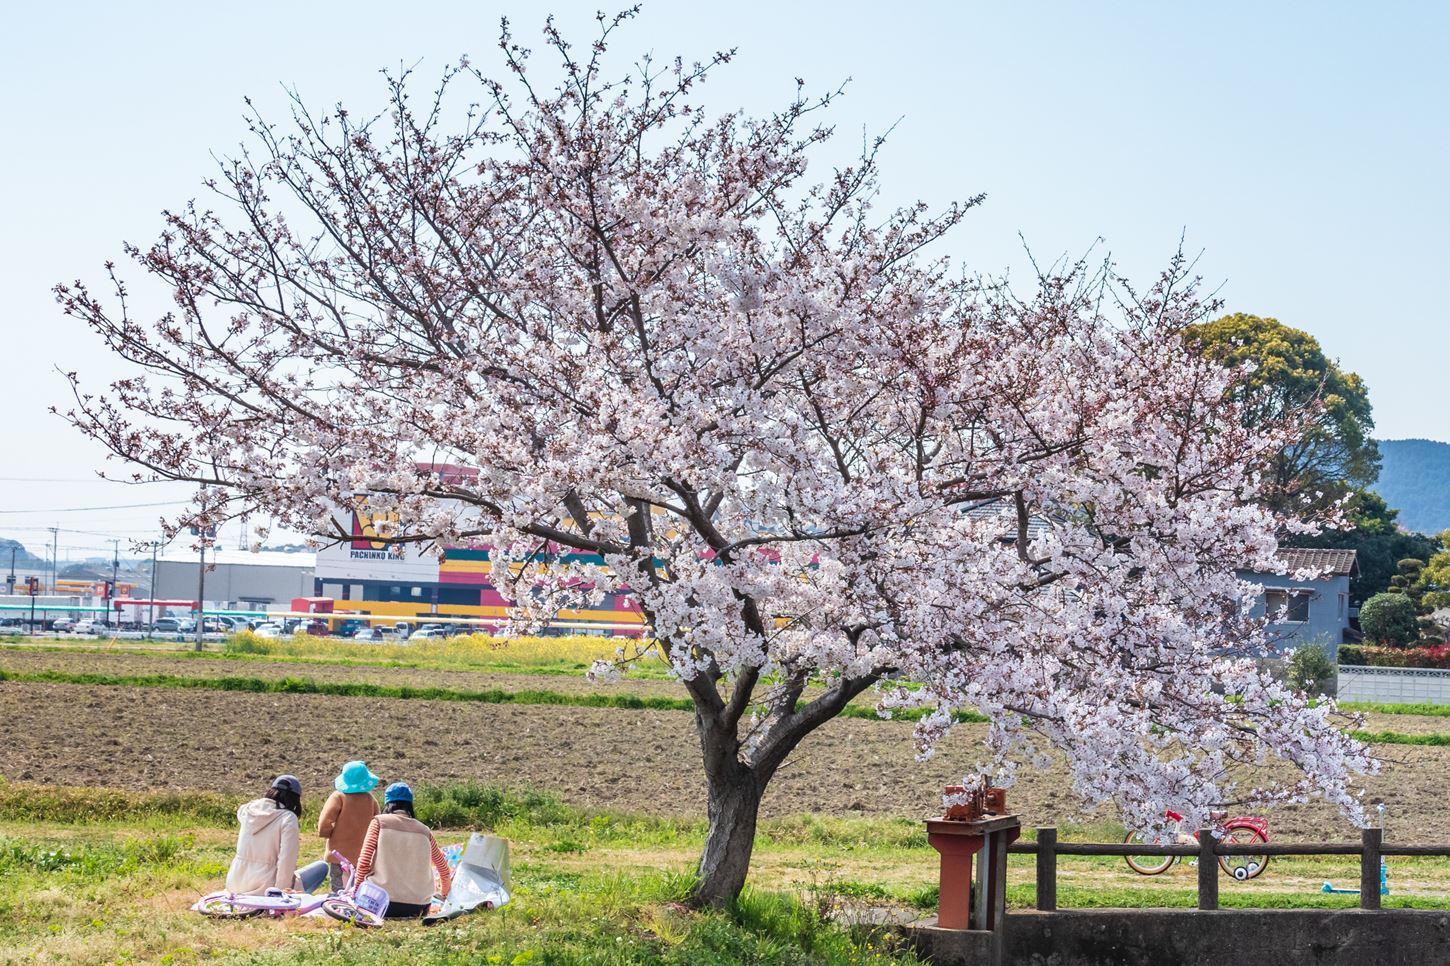 Sightseeing scenery that simply shows the weather and clothes in Fukuoka in April2